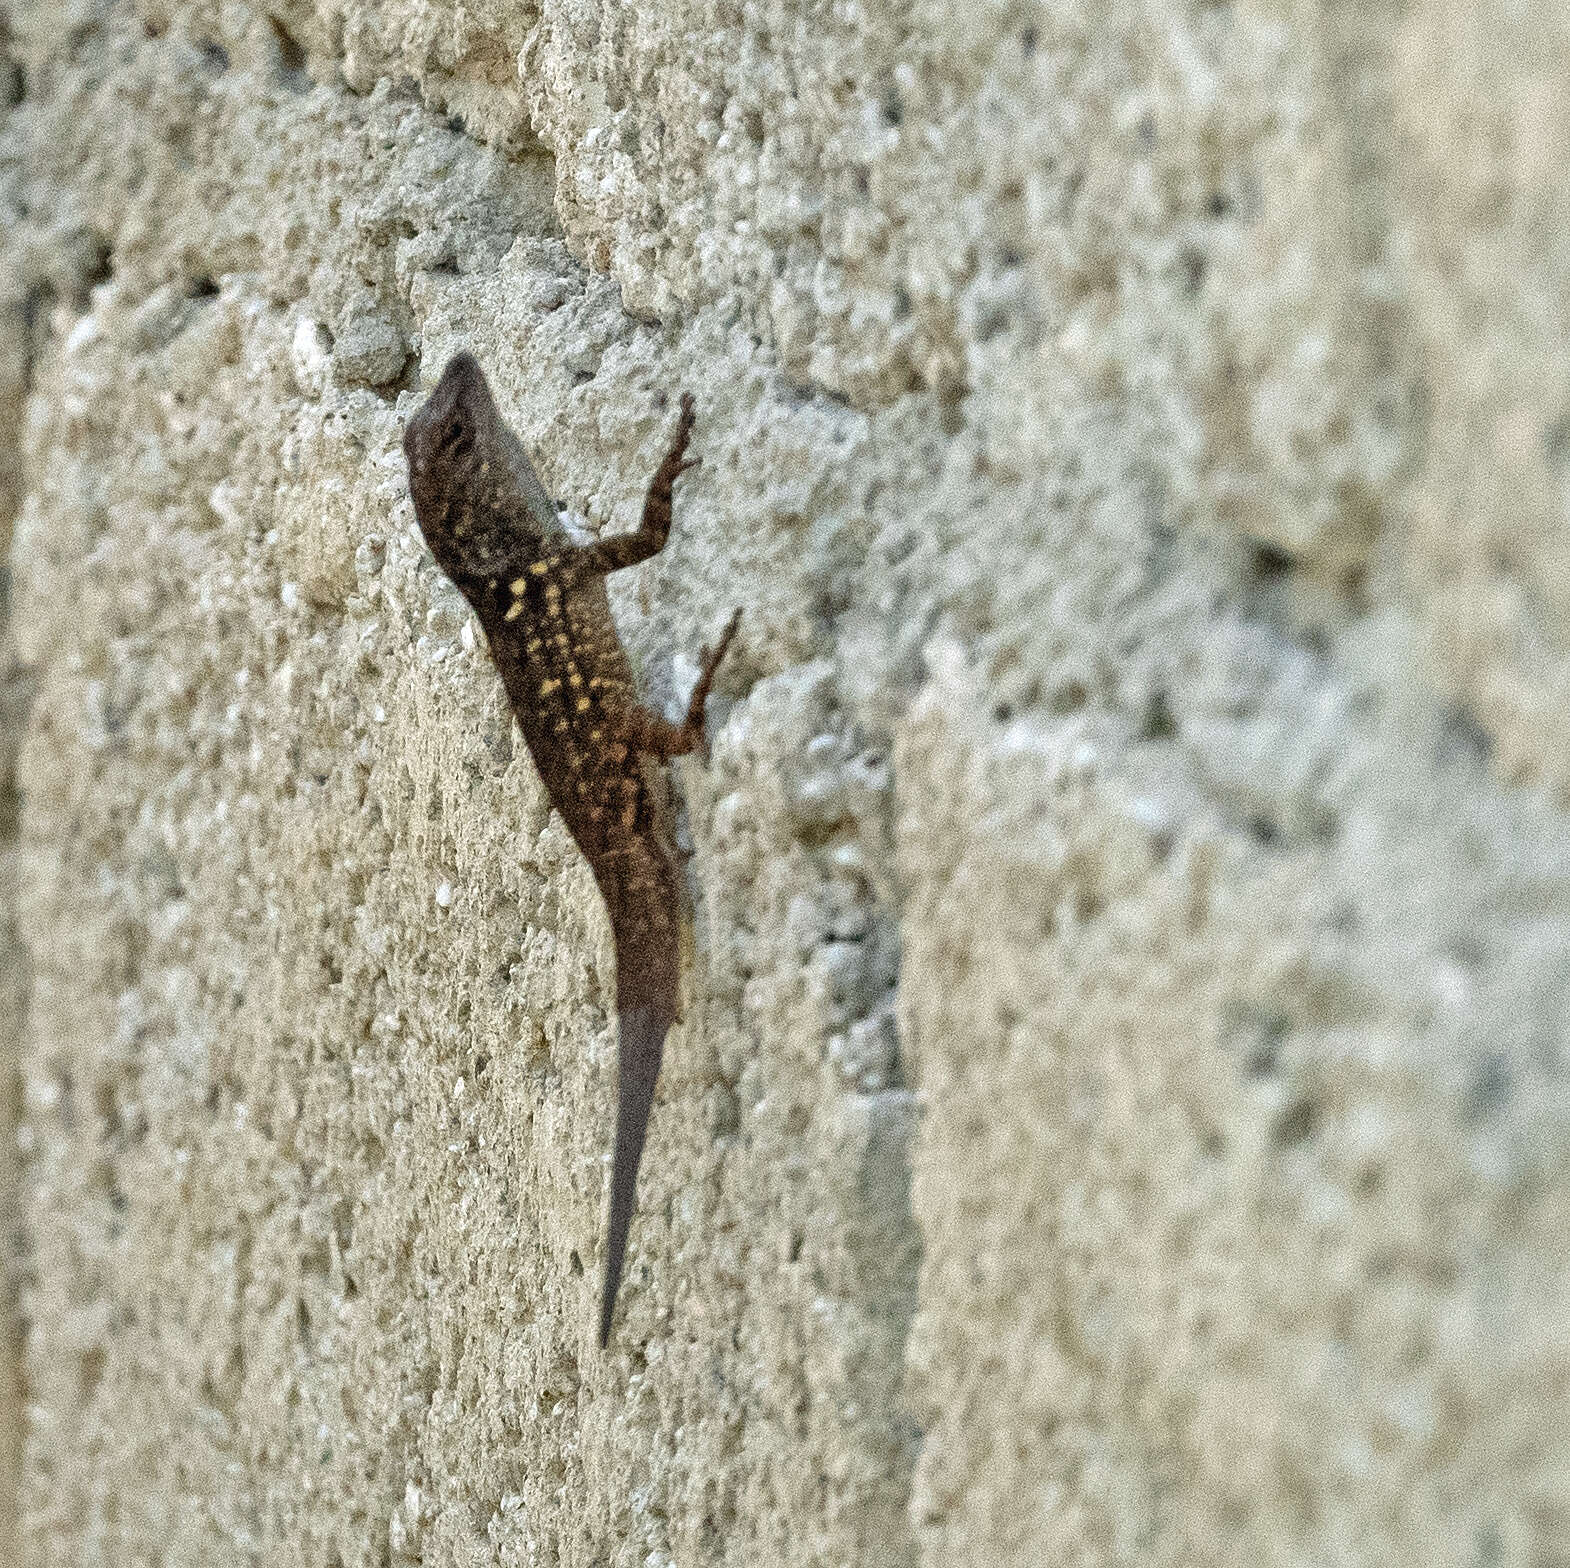 Image of brown anole